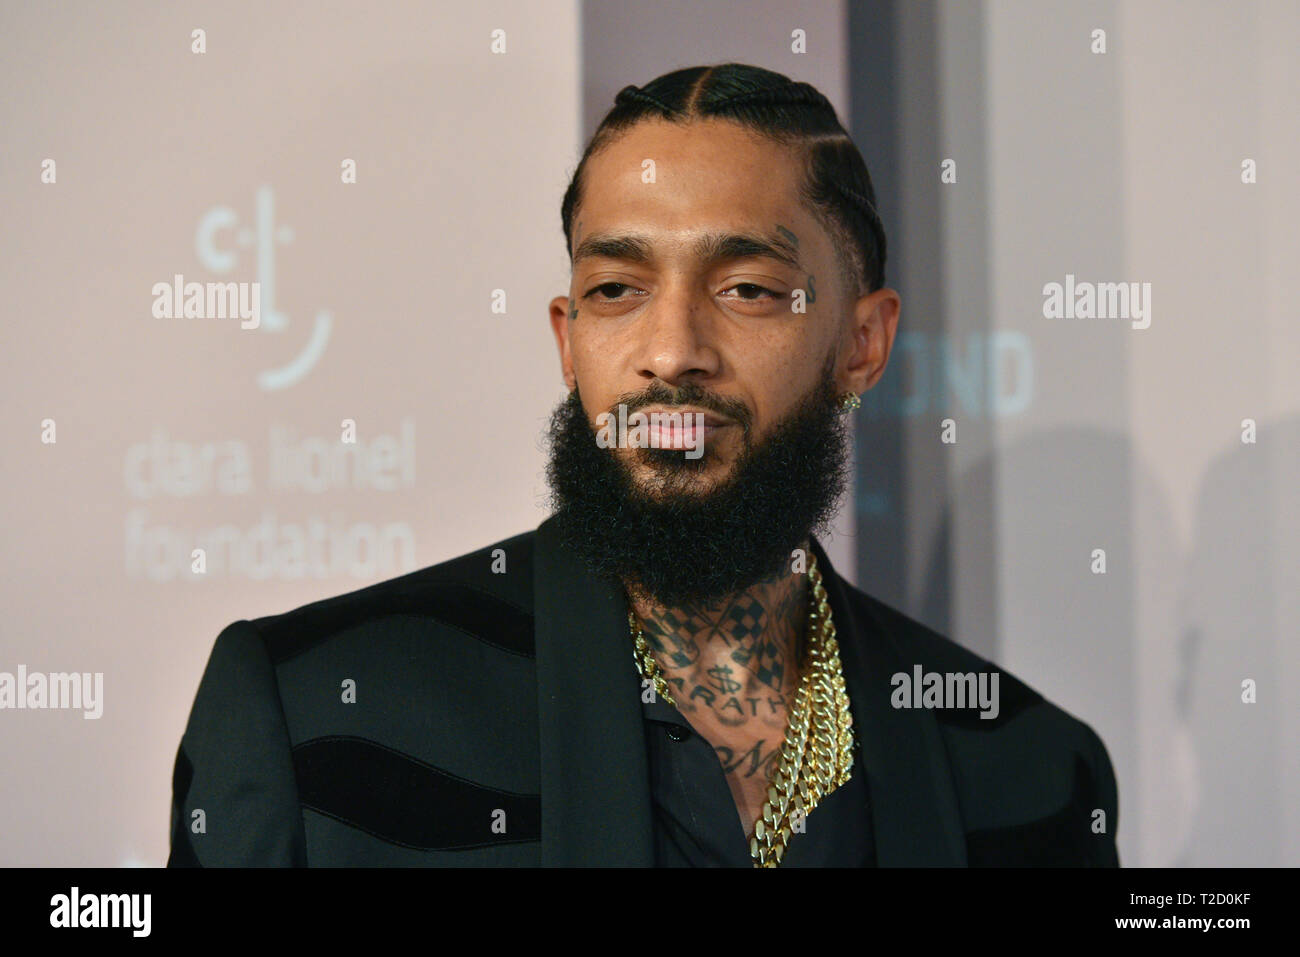 Ermias Asghedom aka Nipsey Hussle attends the 2018 Diamond Ball at Cipriani Wall Street on September 13, 2018 in New York City. Stock Photo